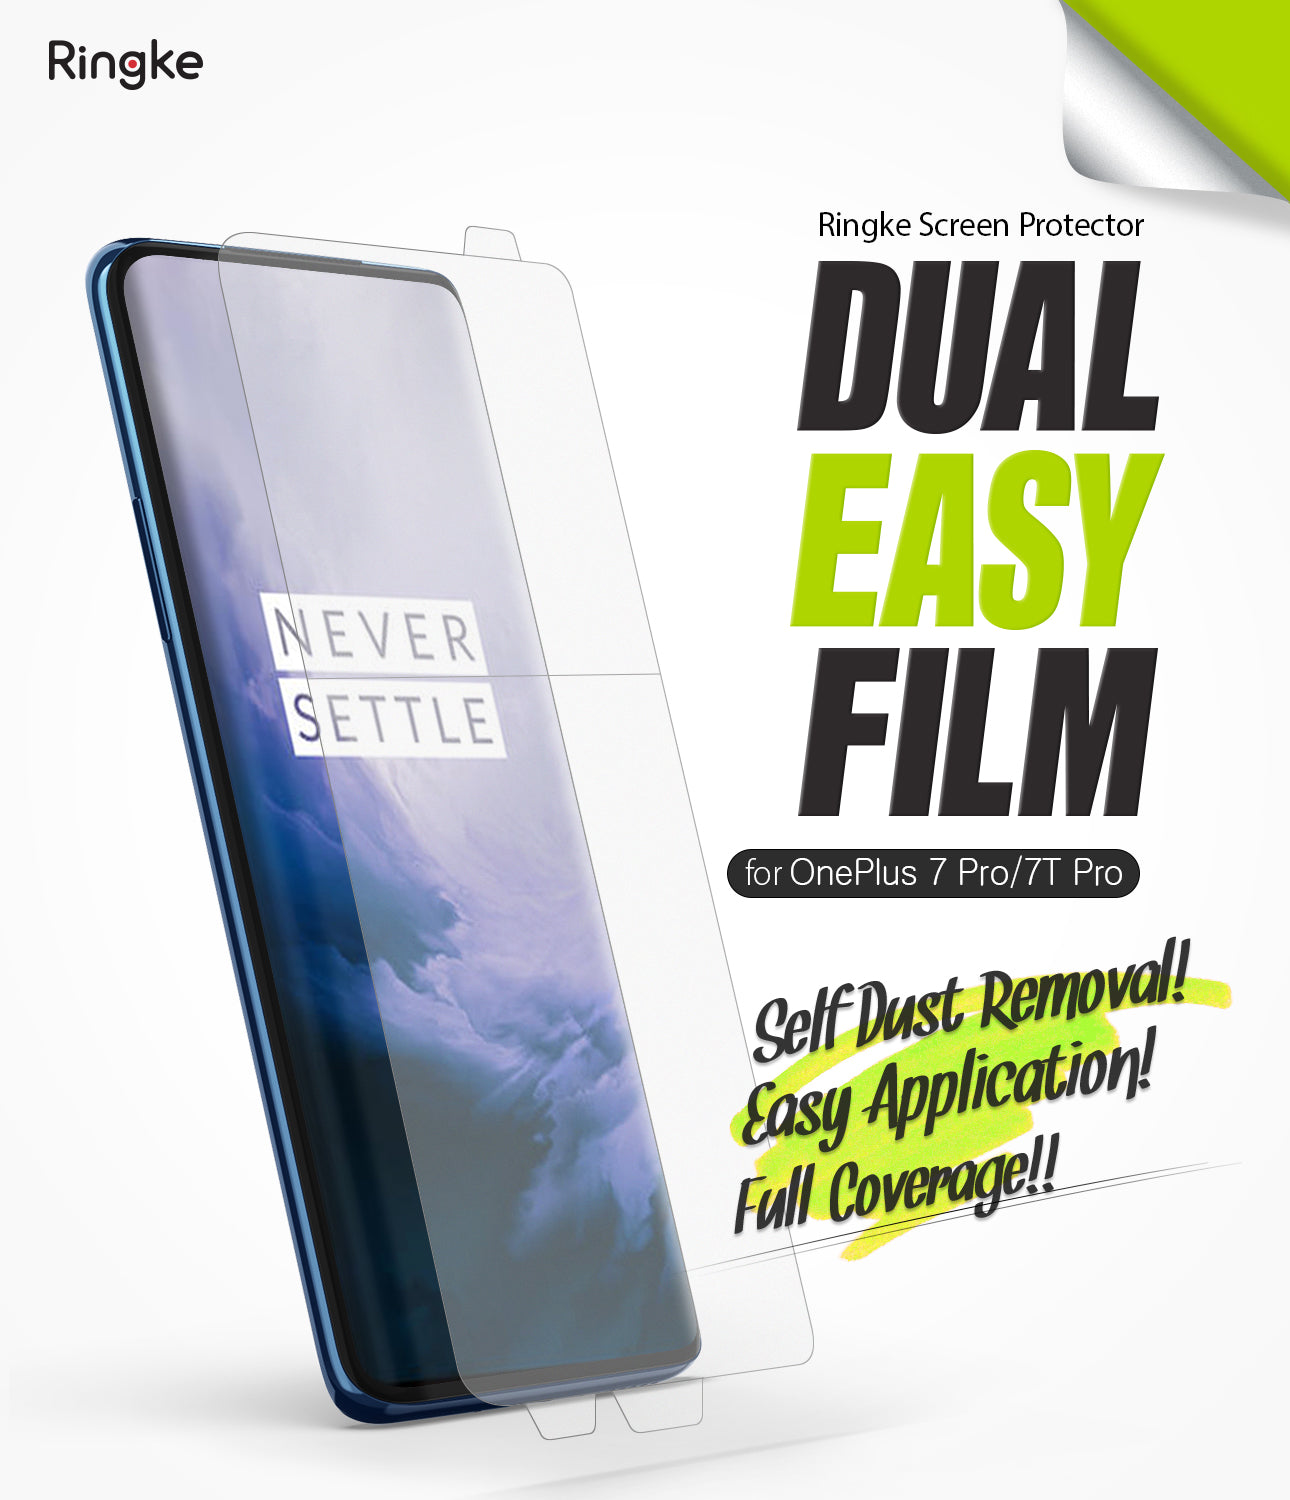 OnePlus 7 Pro / 7T Pro [Dual Easy Film] Screen Protector [2 Pack]